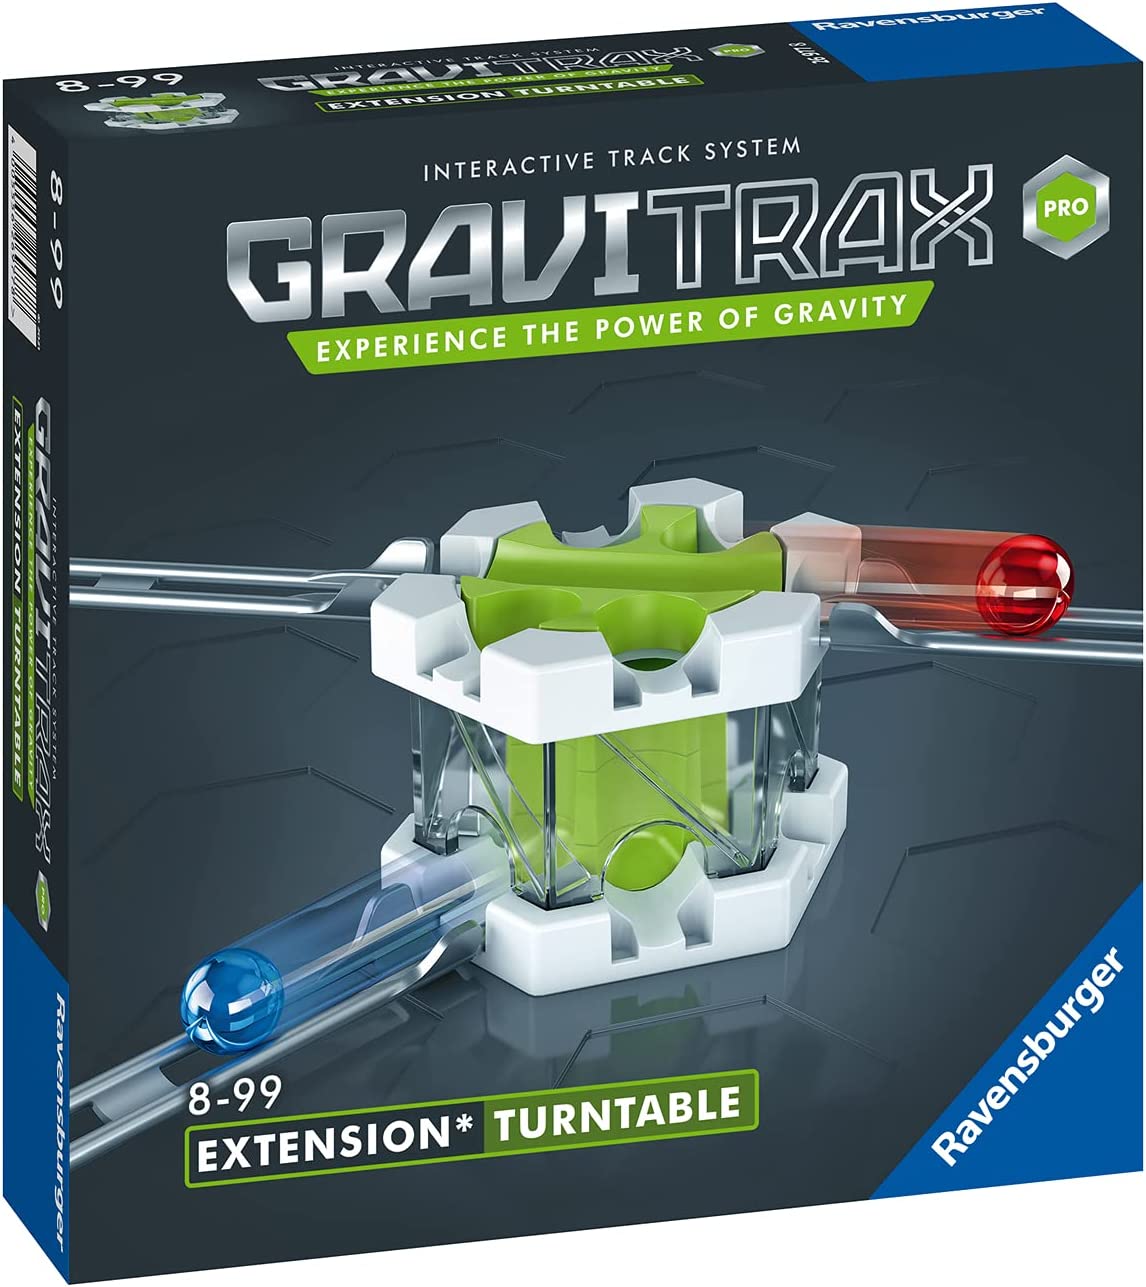 GraviTrax Pro Extension Turntable